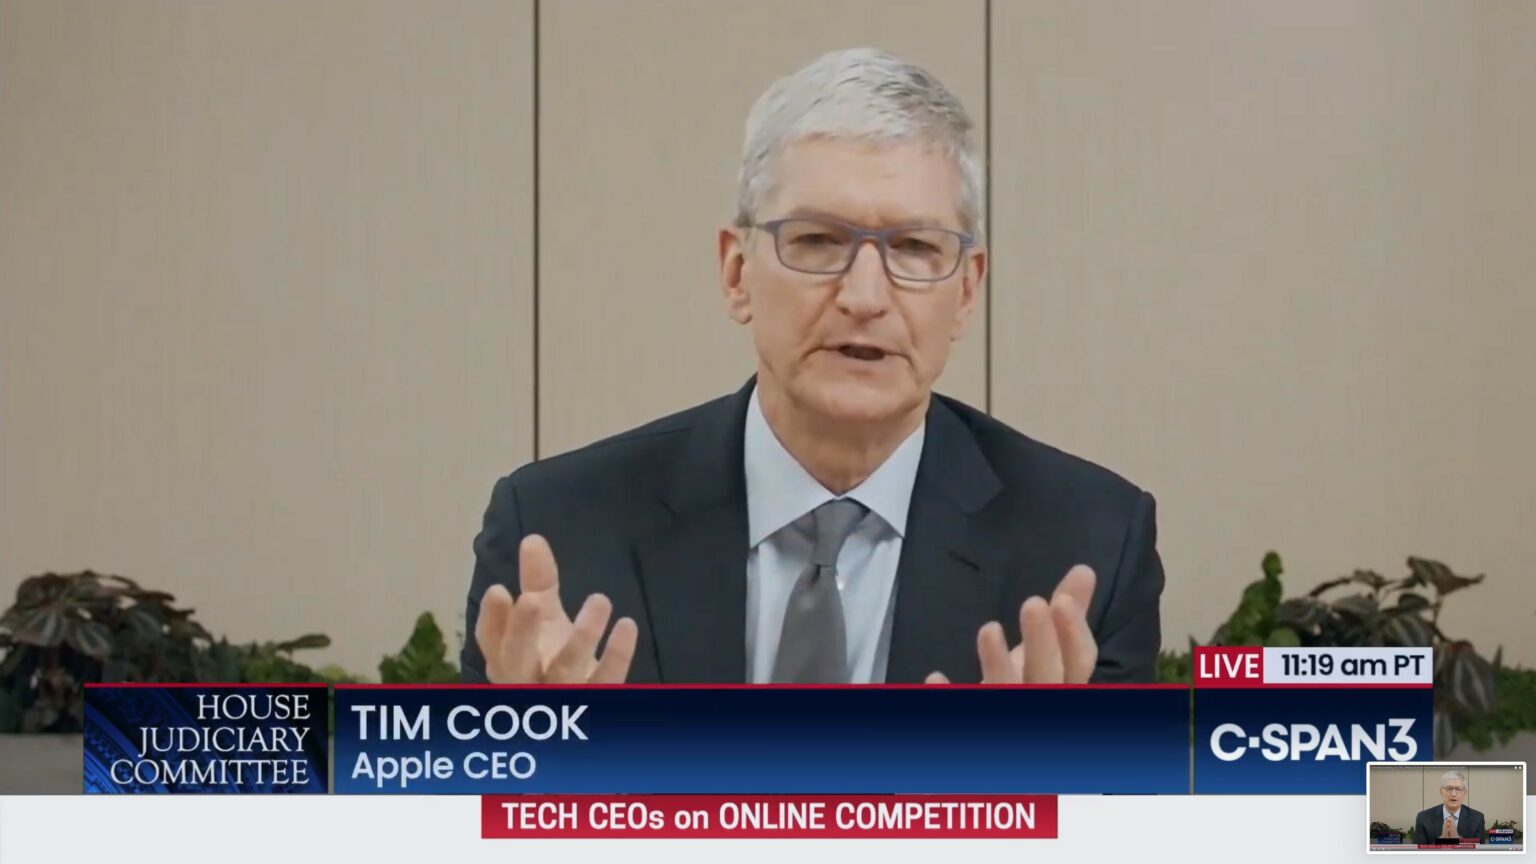 Tim Cook answers questions about App Store business practices during the House Judiciary antitrust subcommittee hearing.